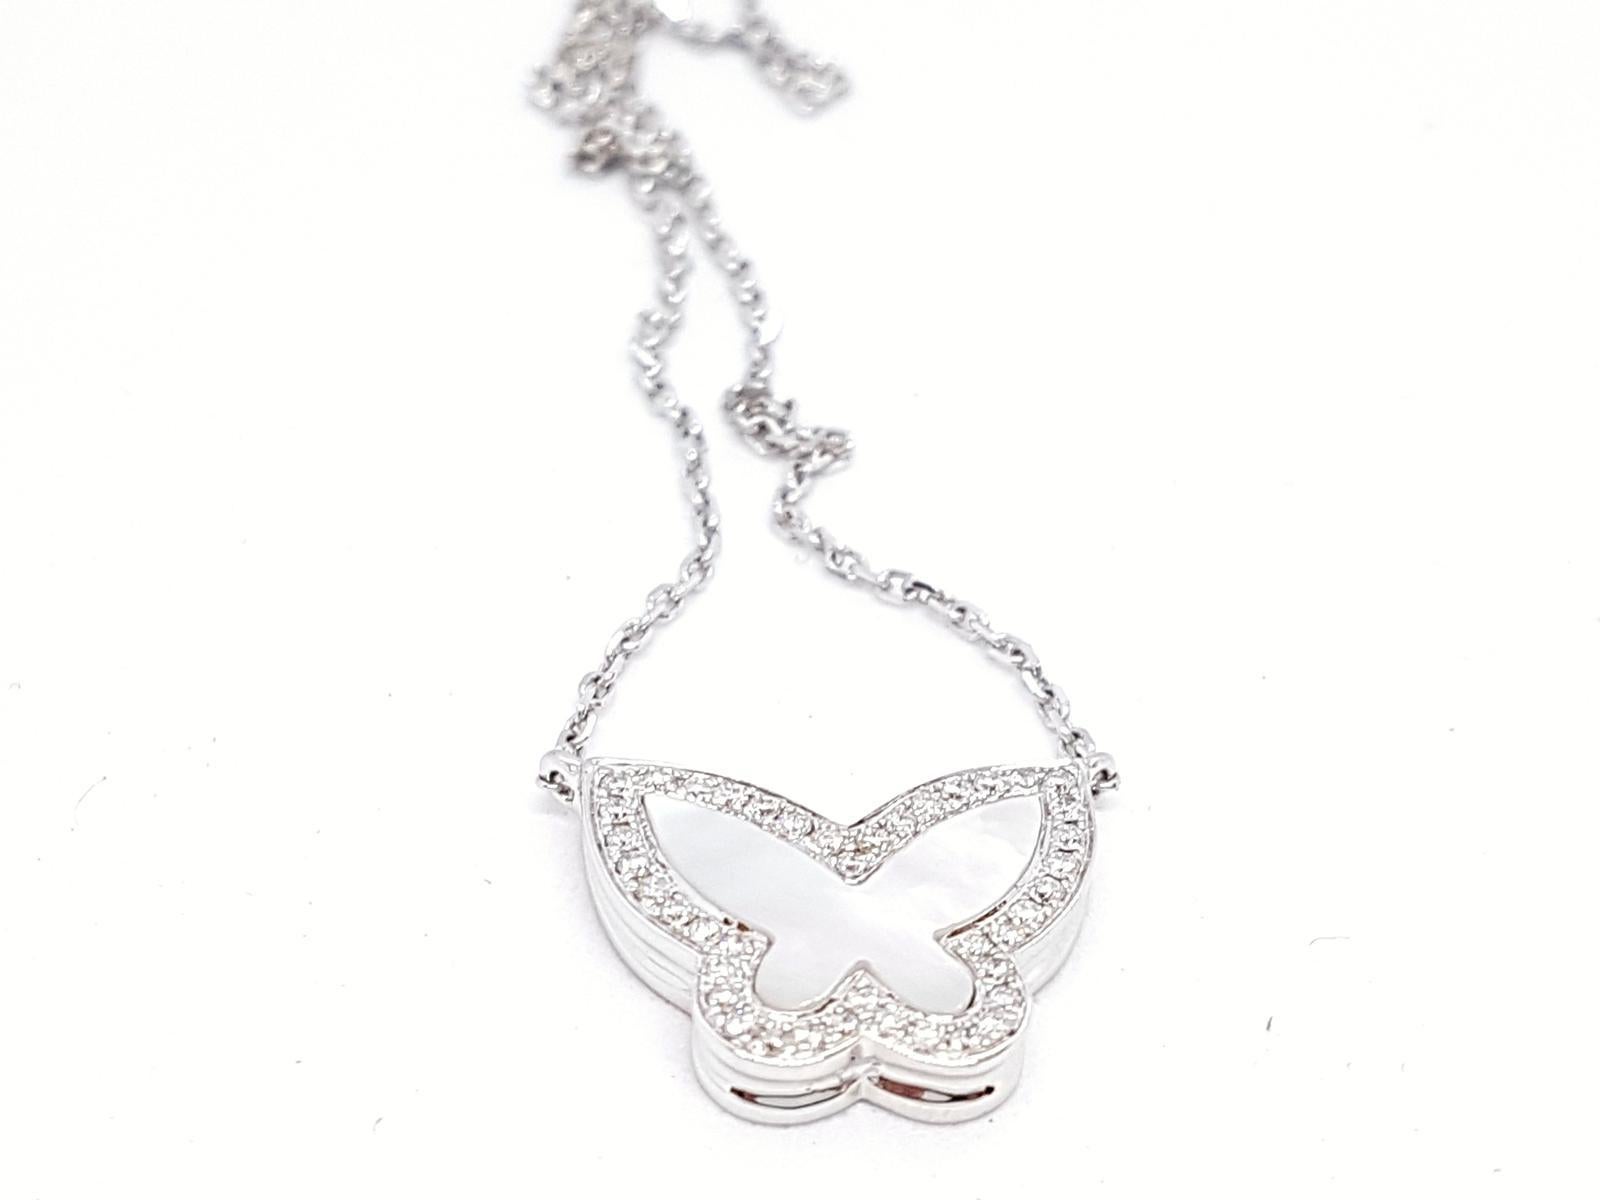 Butterfly pendant pearl and diamonds for envy 0.20 ct. size 1 cm x 1.5 cm. chain 750 thousandths white gold (18K) size 40 cm. total weight: 4.64 g. punched. Excellent condition
